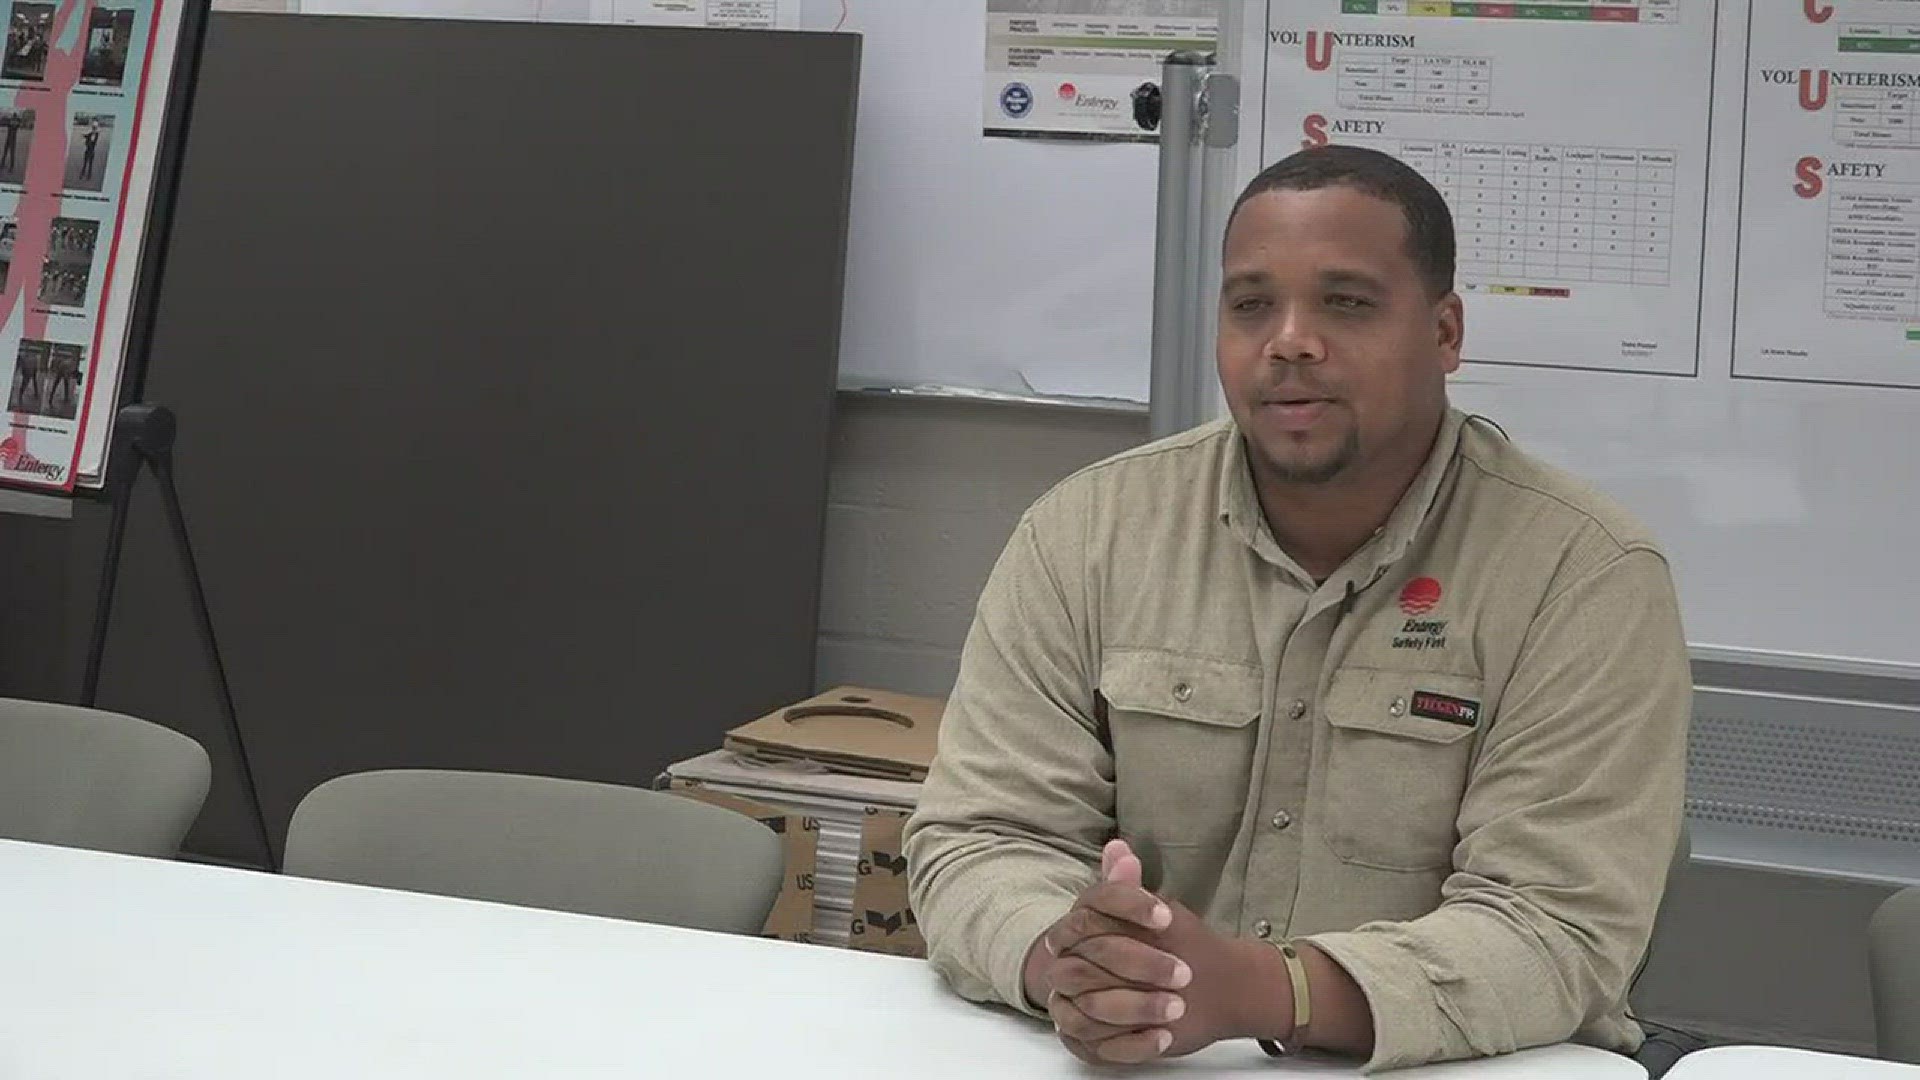 A couple of Entergy employees came to the aid of a State Trooper who was struggling with a suspect on the side of the road in Houma recently.